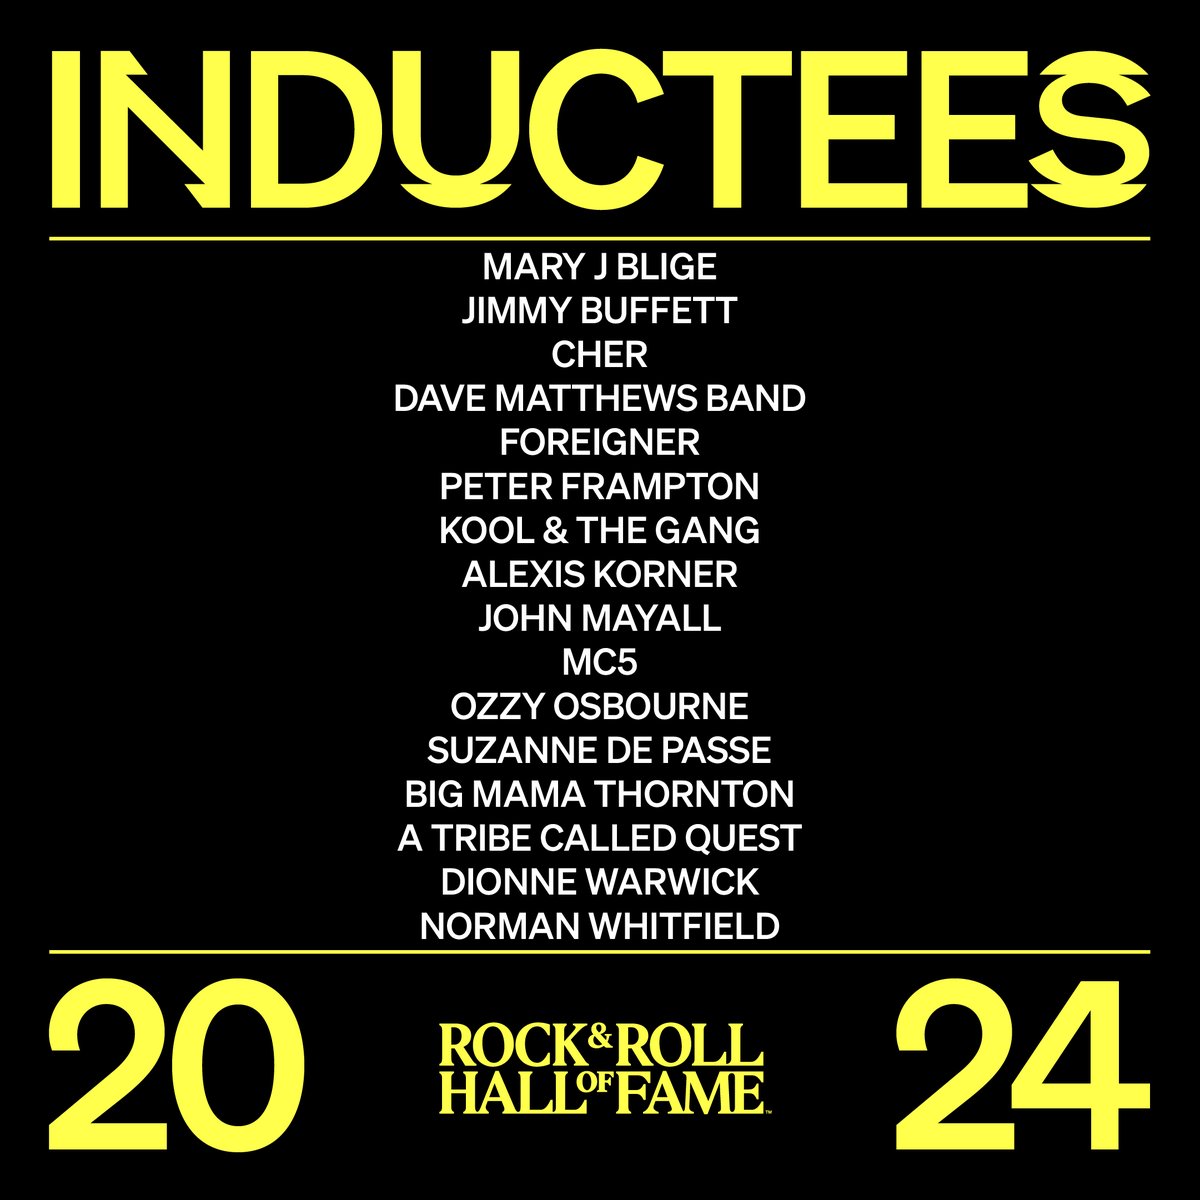 Congratulations to the #RockHall2024 Inductee Class for achieving Music's Highest Honor! 🤘 Learn more about this year's Inductees here: rockhall.com/2024-inductees